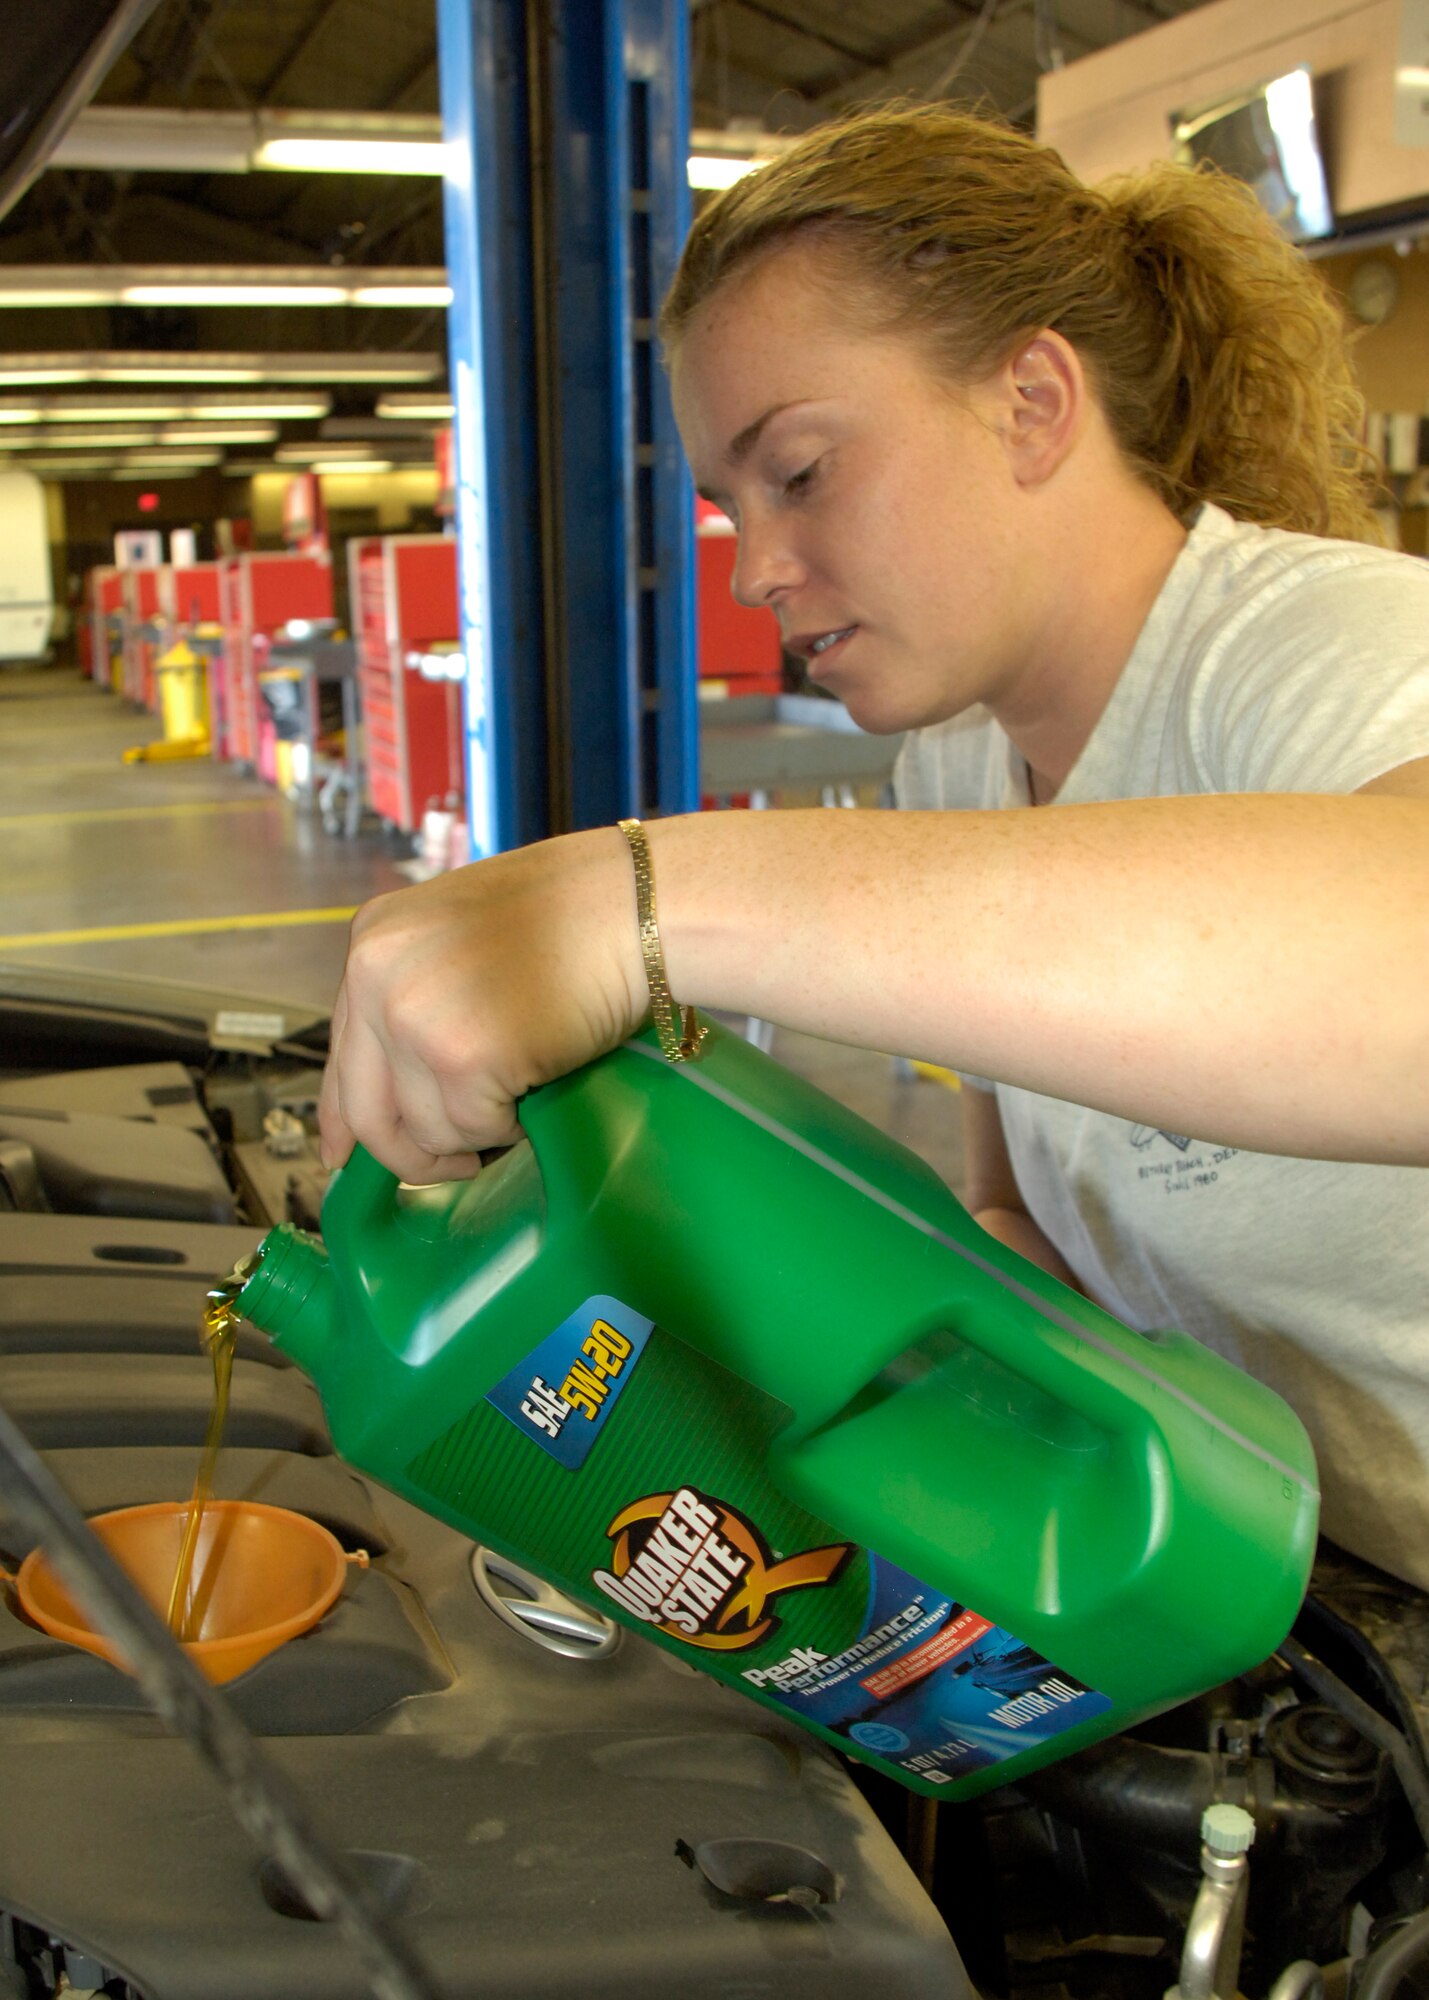 Airman 1st Class Krista Lawrence, 49th Civil Engineer Squadron, changes the oil in her vehicle at the Auto Hobby Center on Holloman Air Force Base, N.M., May 22. The center offers one on one teaching assistance for any task you wish to tackle. (U.S. Air Force photo/Airman 1st Class Michael Means)